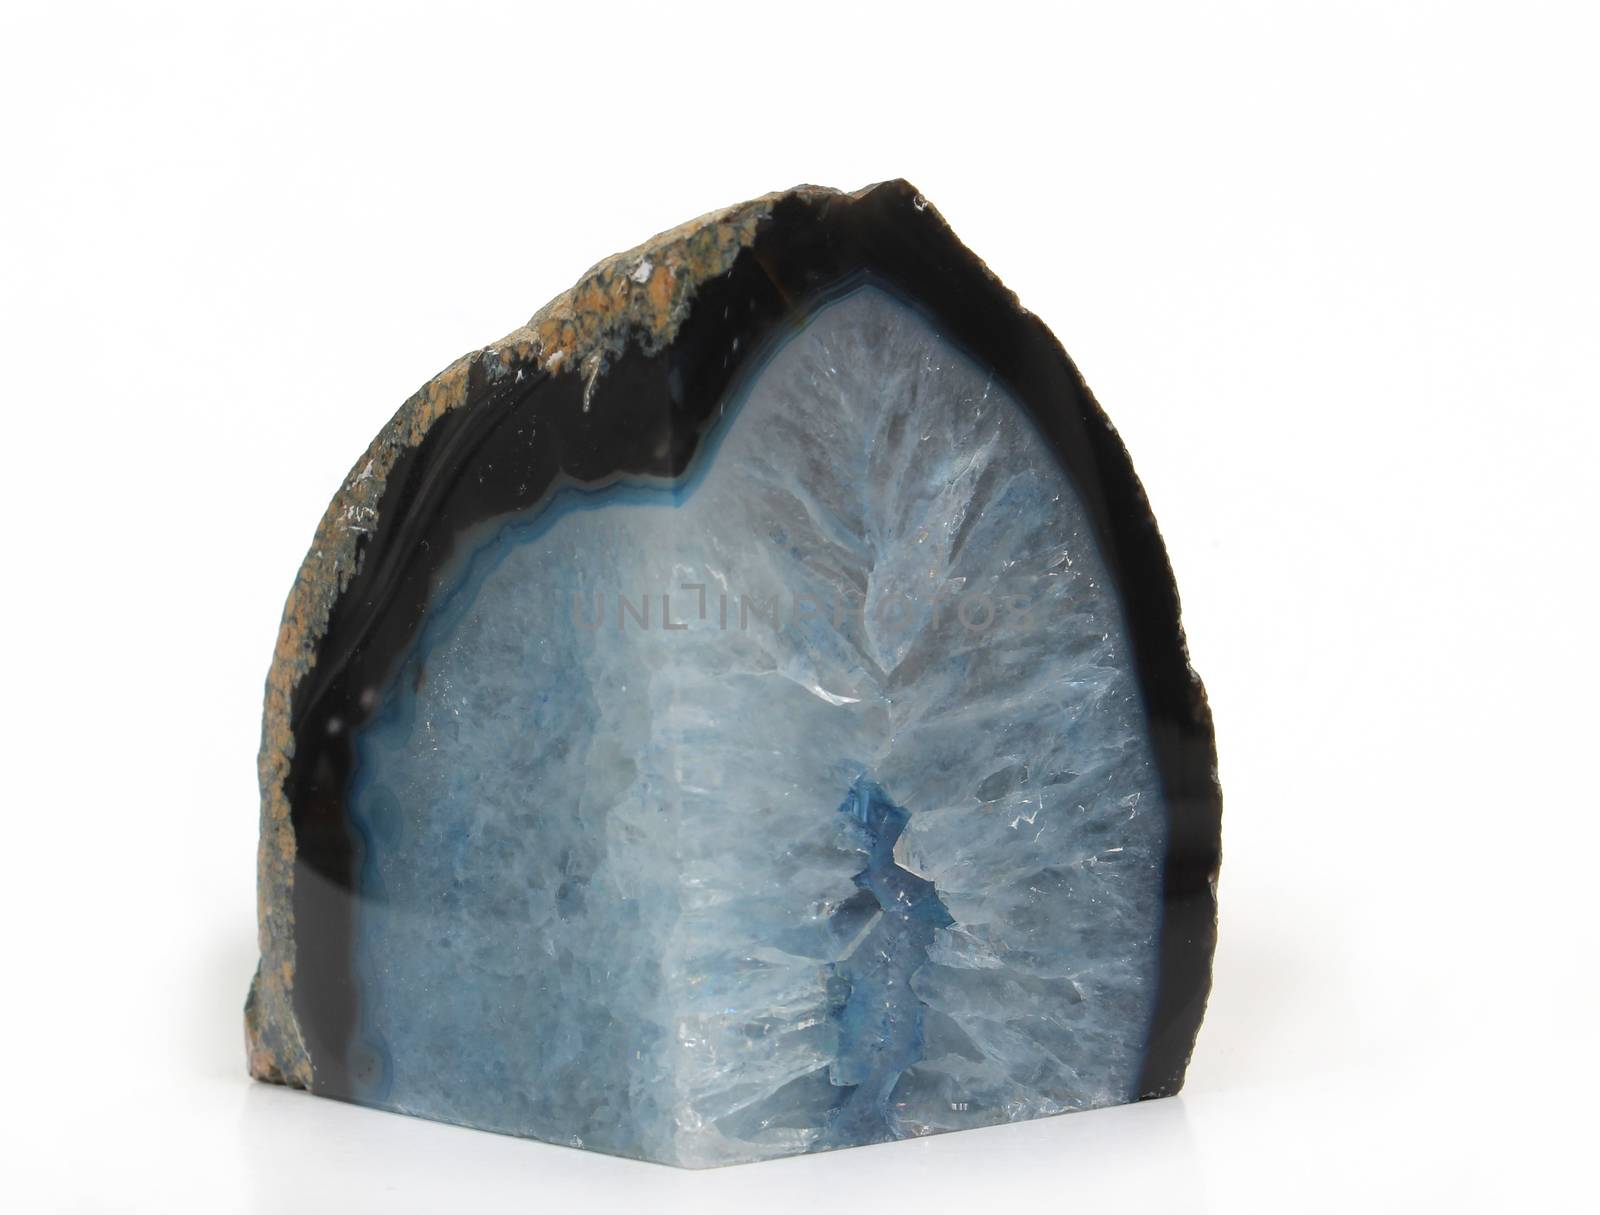 Blue Geode stone on white by Marti157900